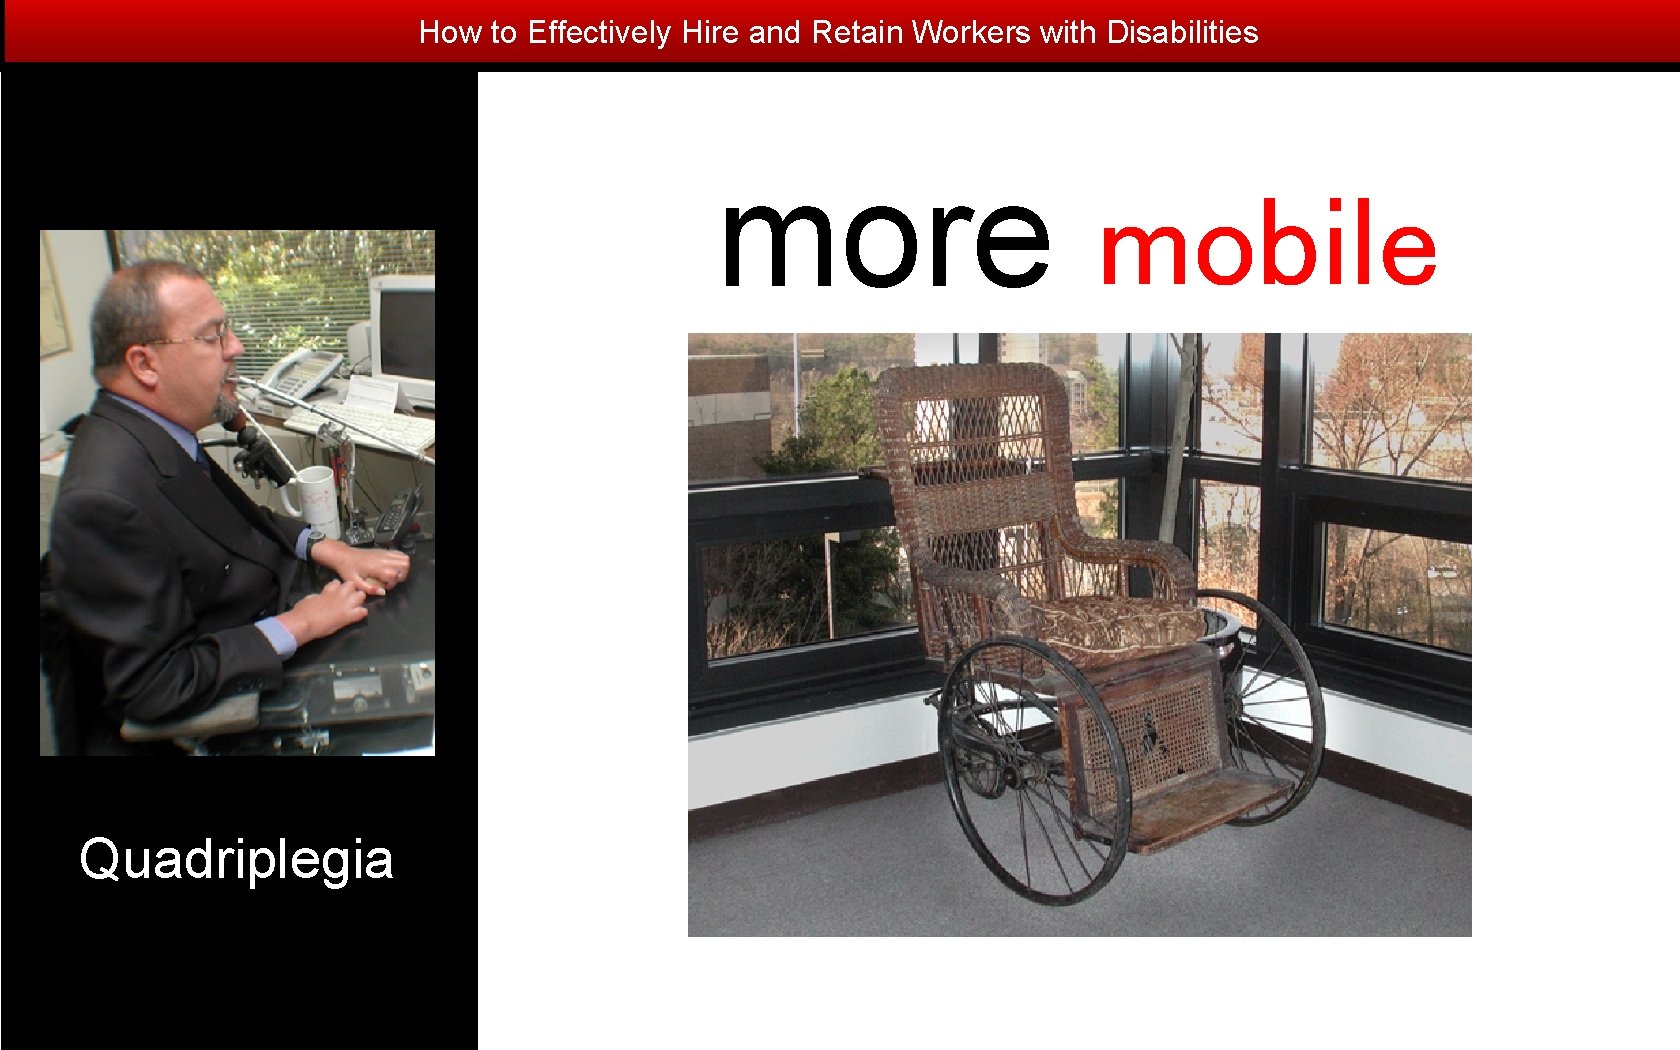 How to Effectively Hire and Retain Workers with Disabilities more mobile Quadriplegia 